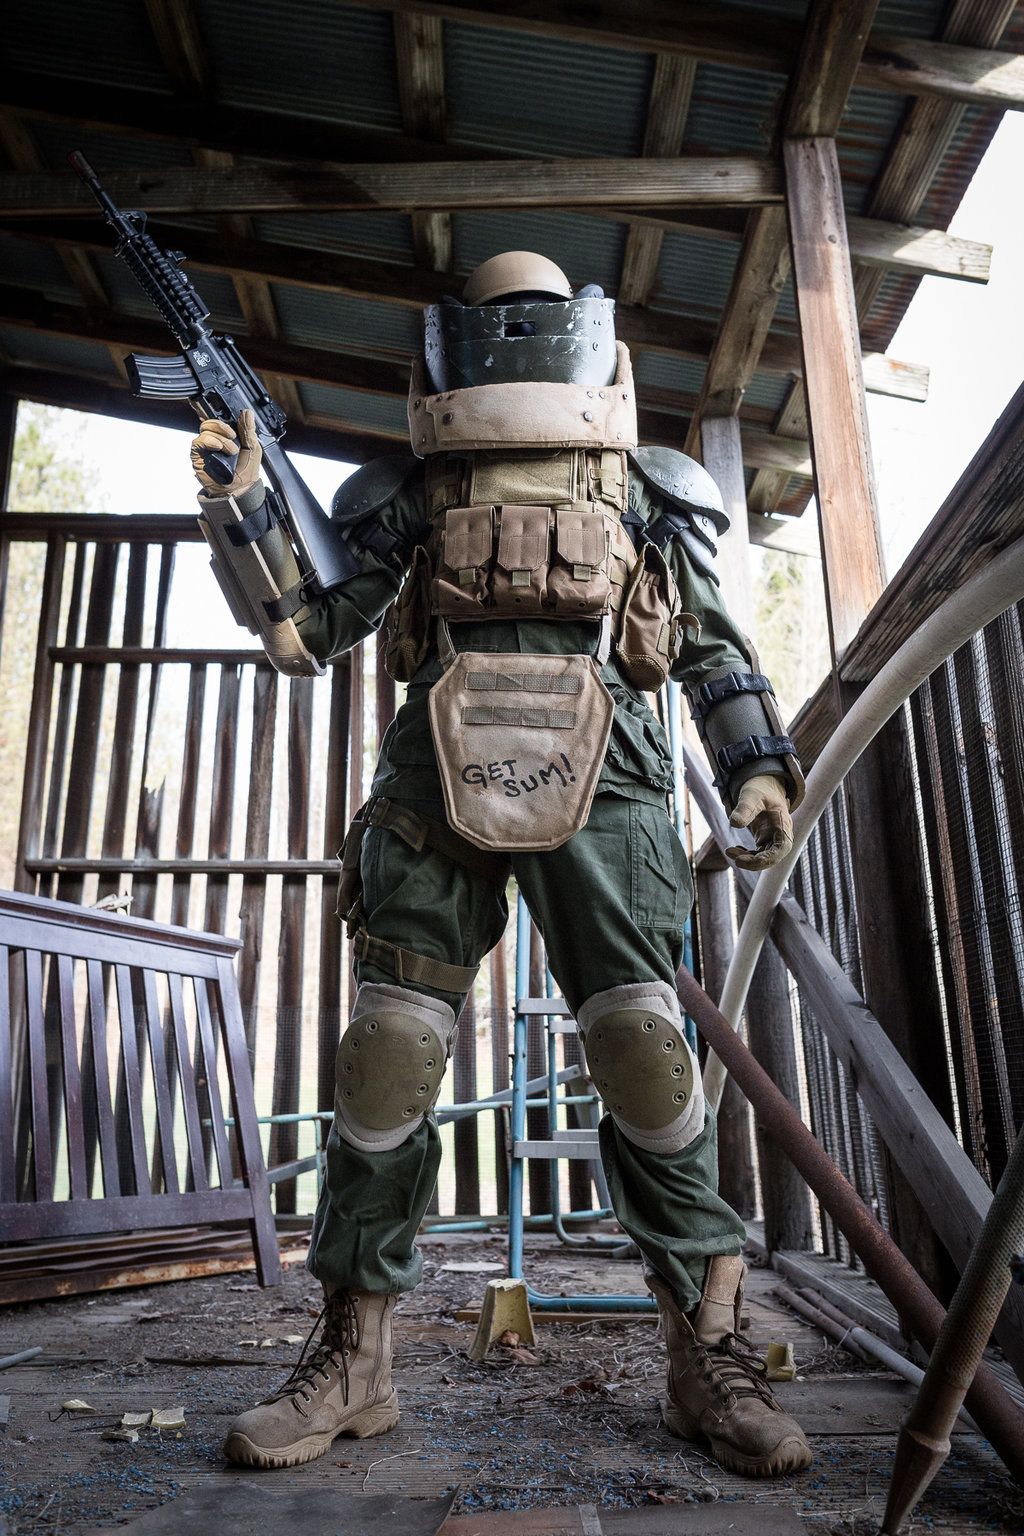 Some Big-Arse Call Of Duty Cosplay